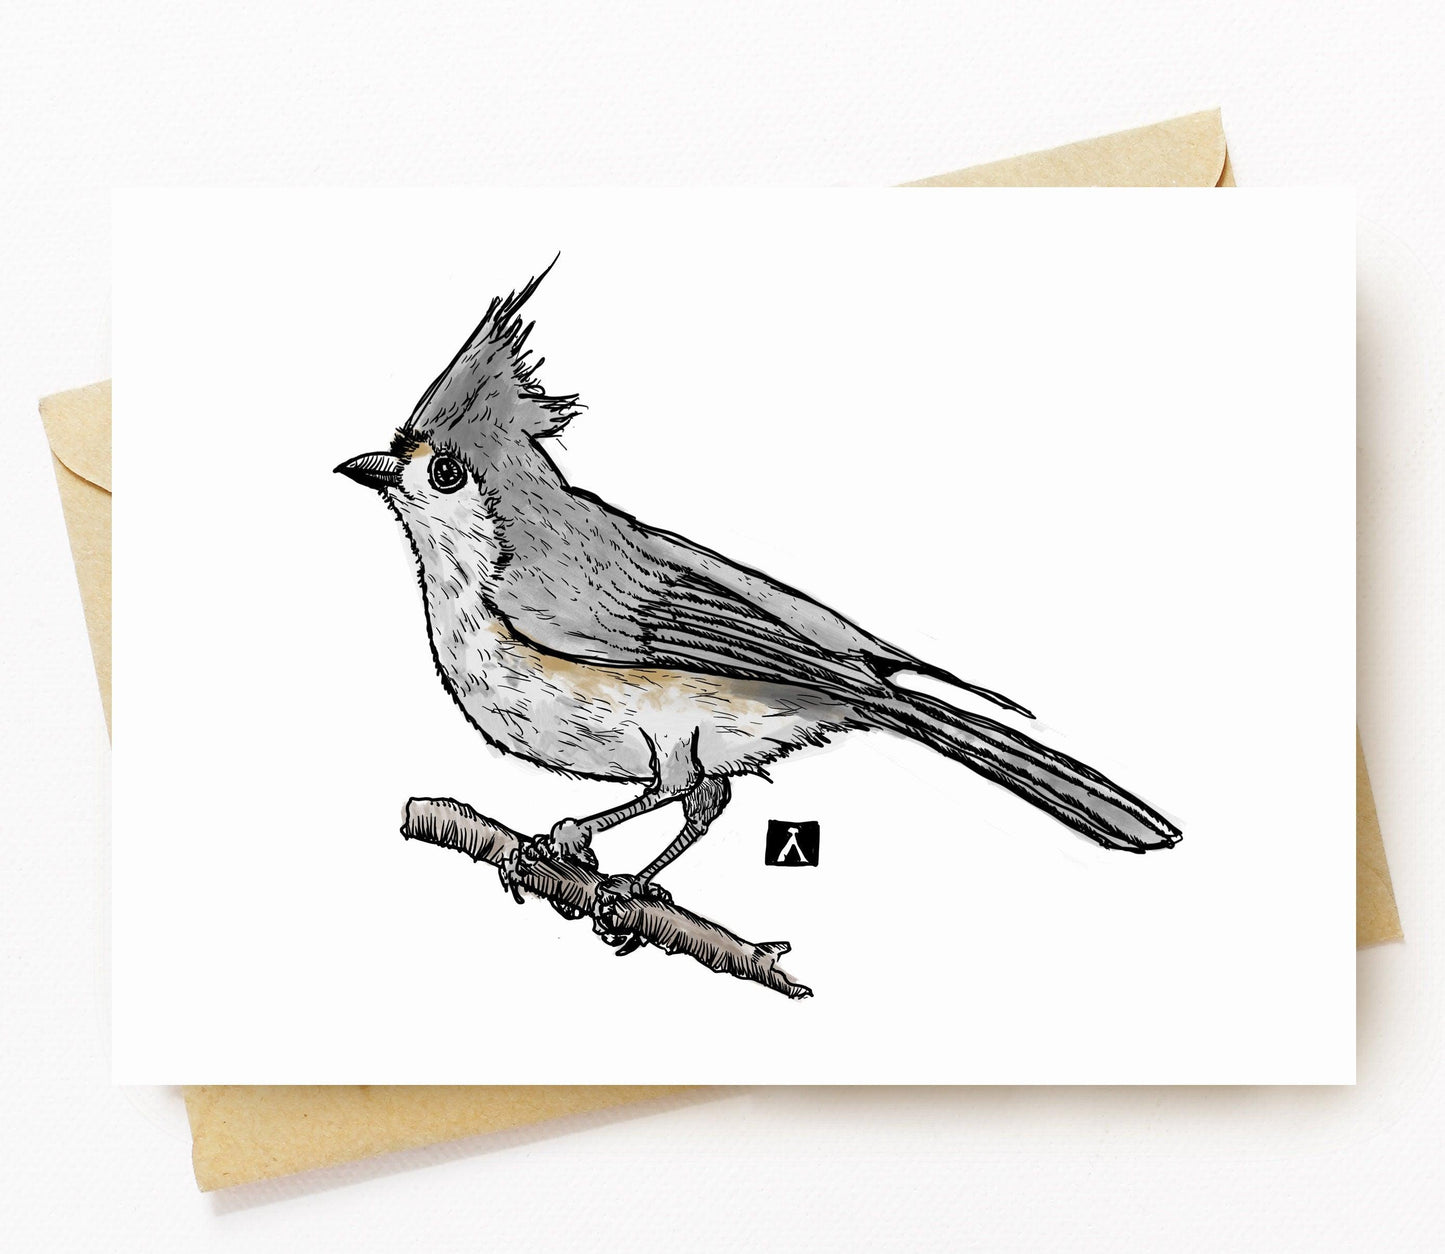 BellavanceInk: Greeting Card With Tufted Titmouse On A Tree Branch Pen & Ink Watercolor Illustration 5 x 7 Inches - BellavanceInk